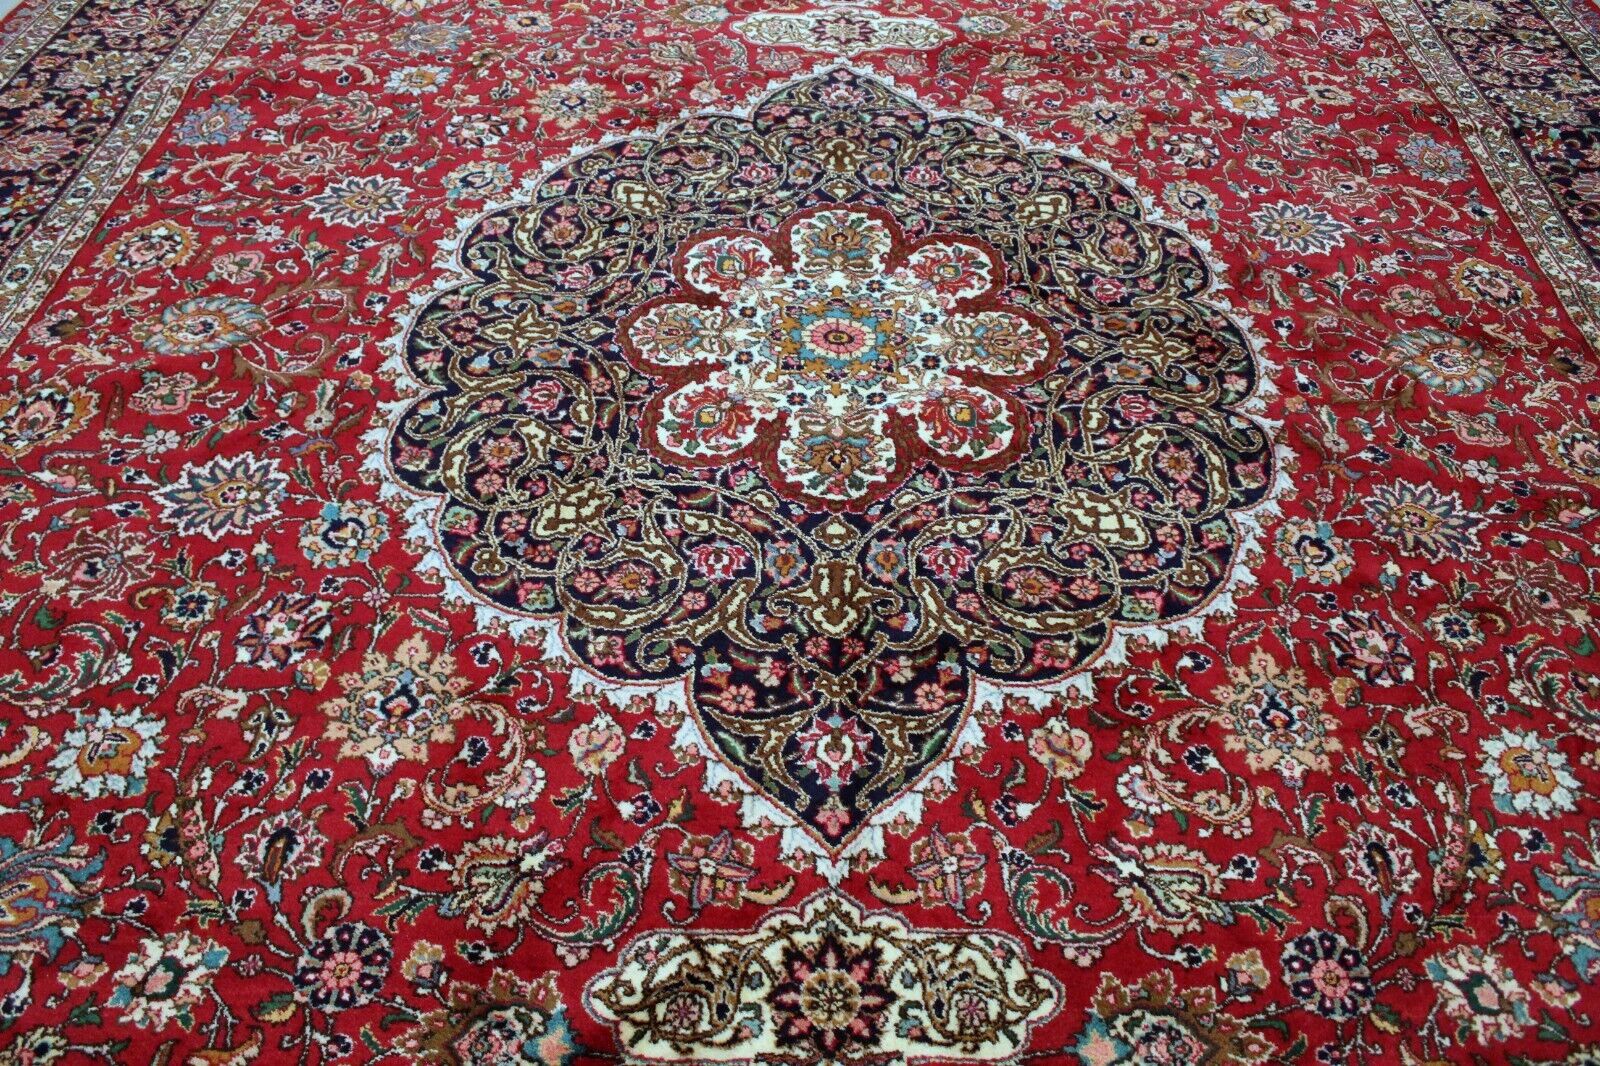 Rich Red Base Color Creating Warm and Inviting Backdrop for Elaborate Designs on Handcrafted Tabriz Rug - 1960s